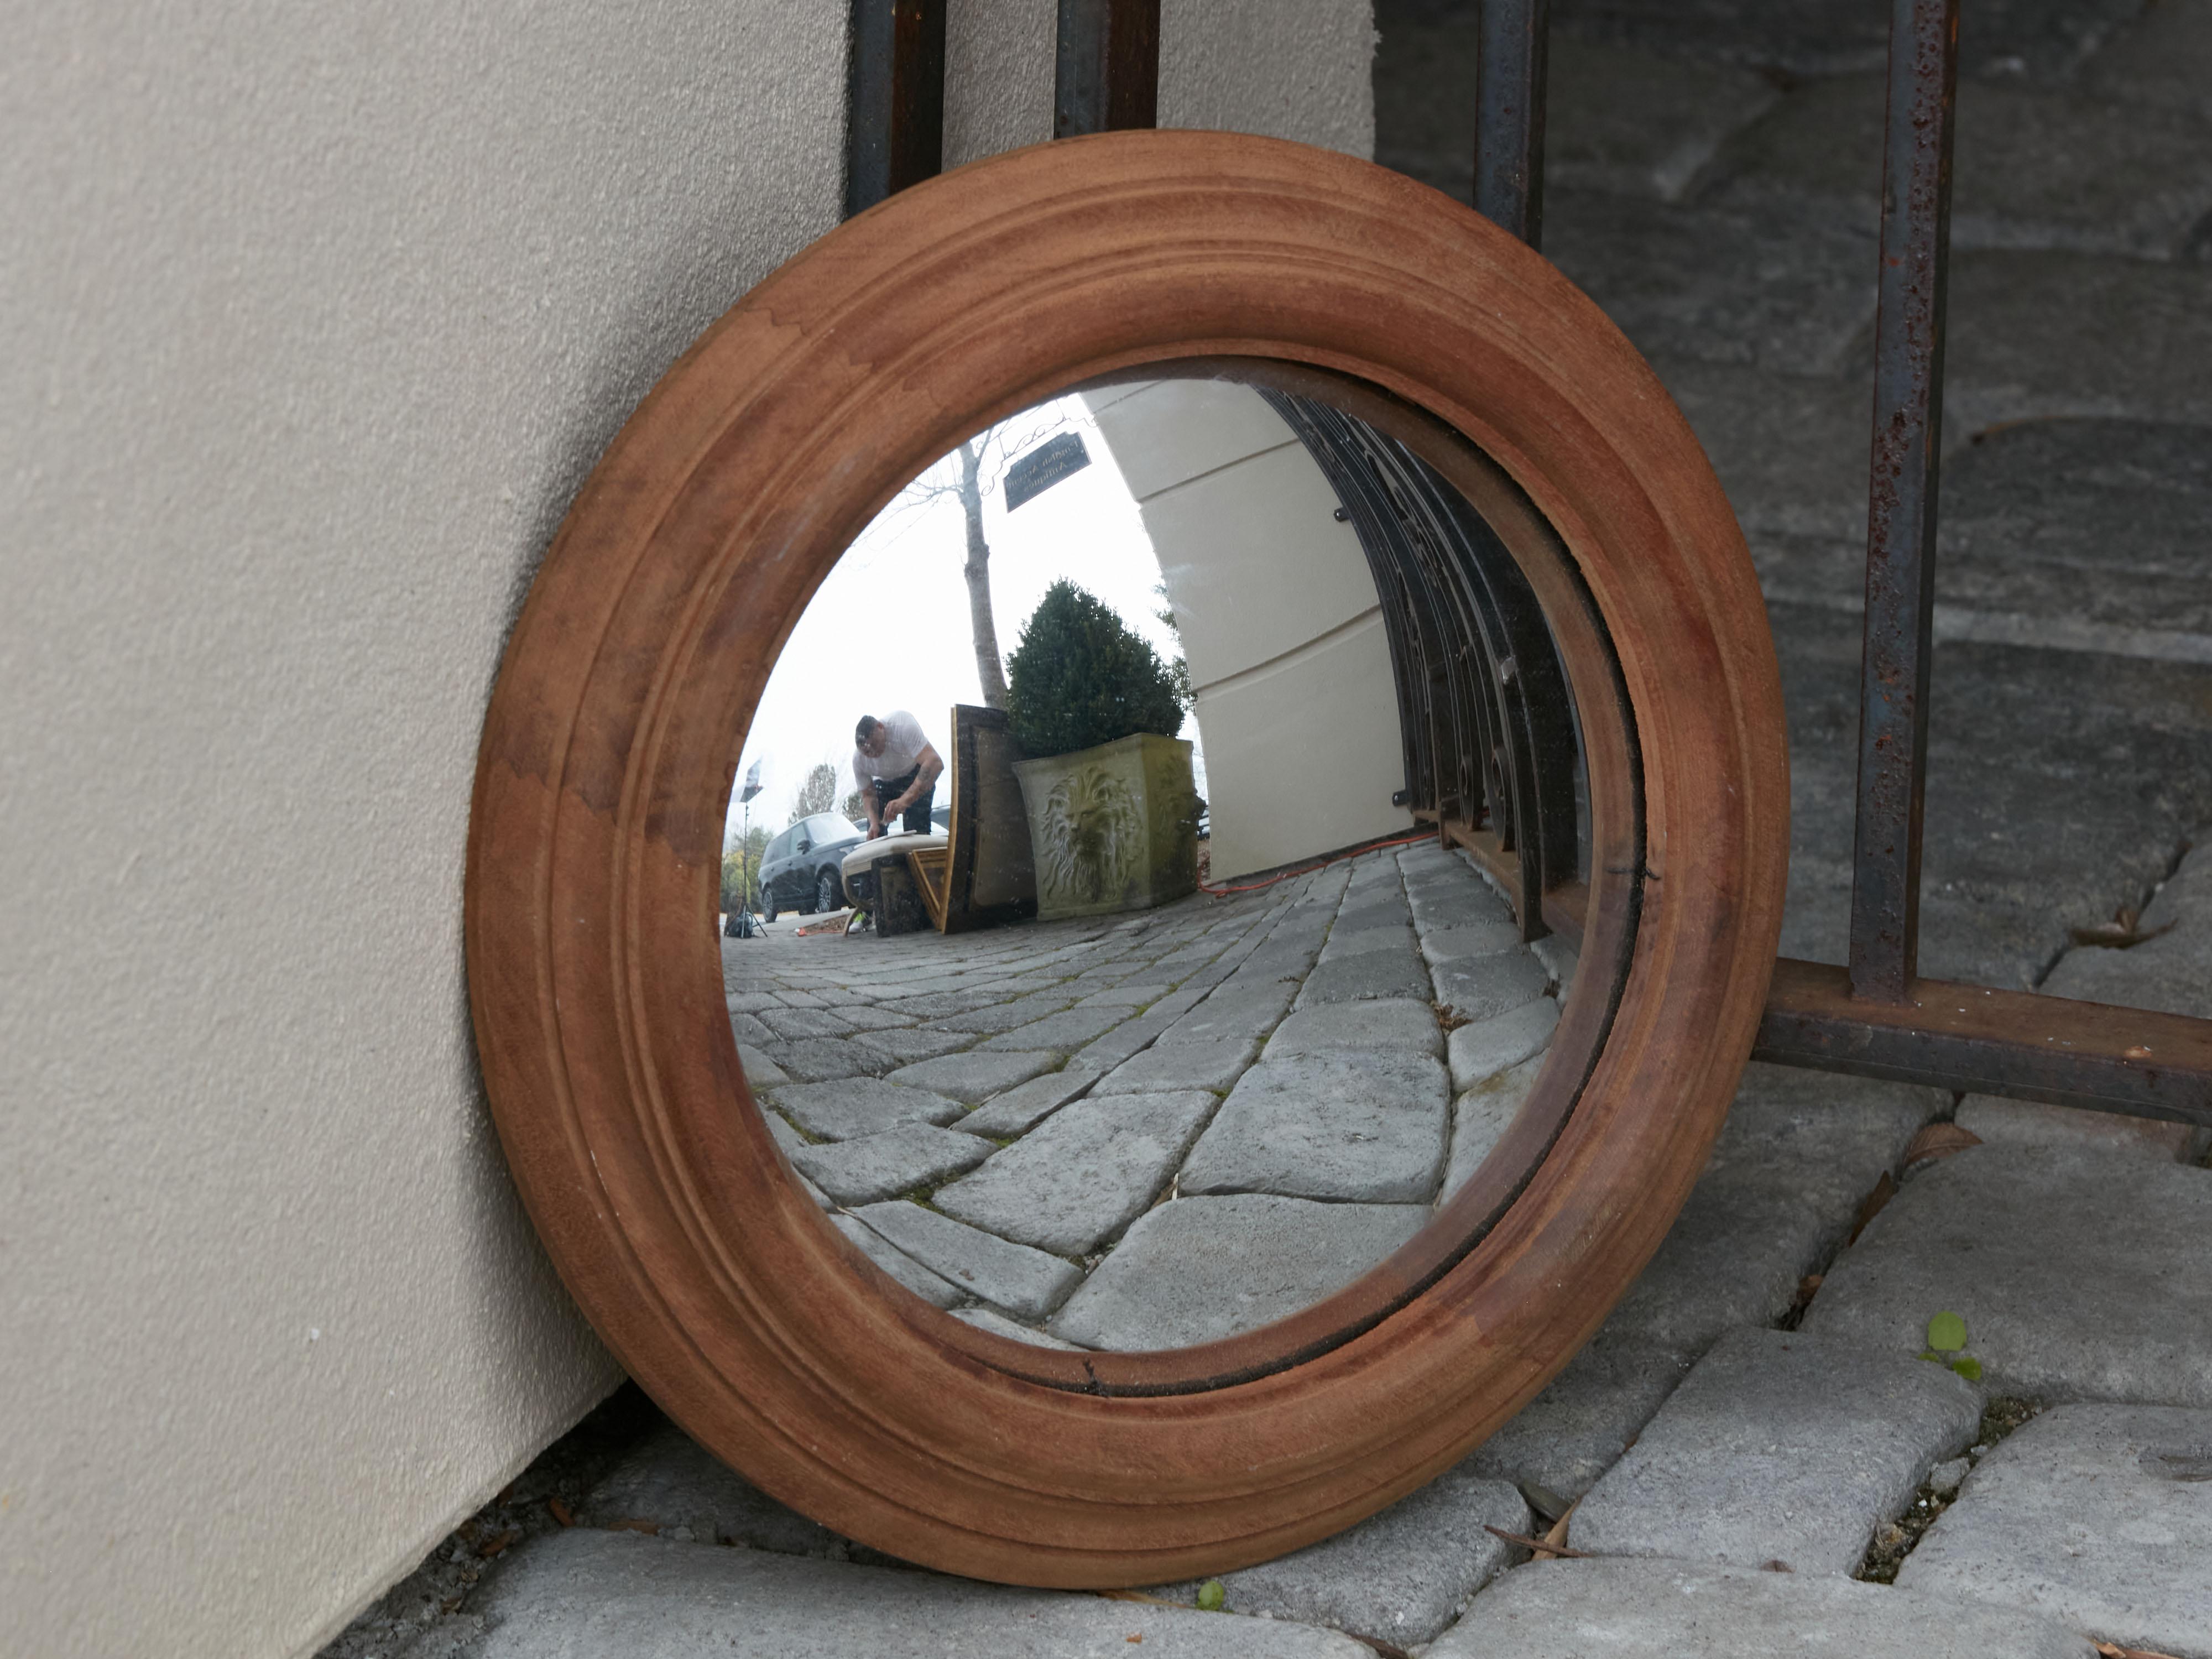 An English convex bullseye mirror with molded frame. Created in England, this wall mirror features a simple circular frame with molded accents, surrounding a convex mirror sought after for its distorted reflection. An elegant addition to any home,